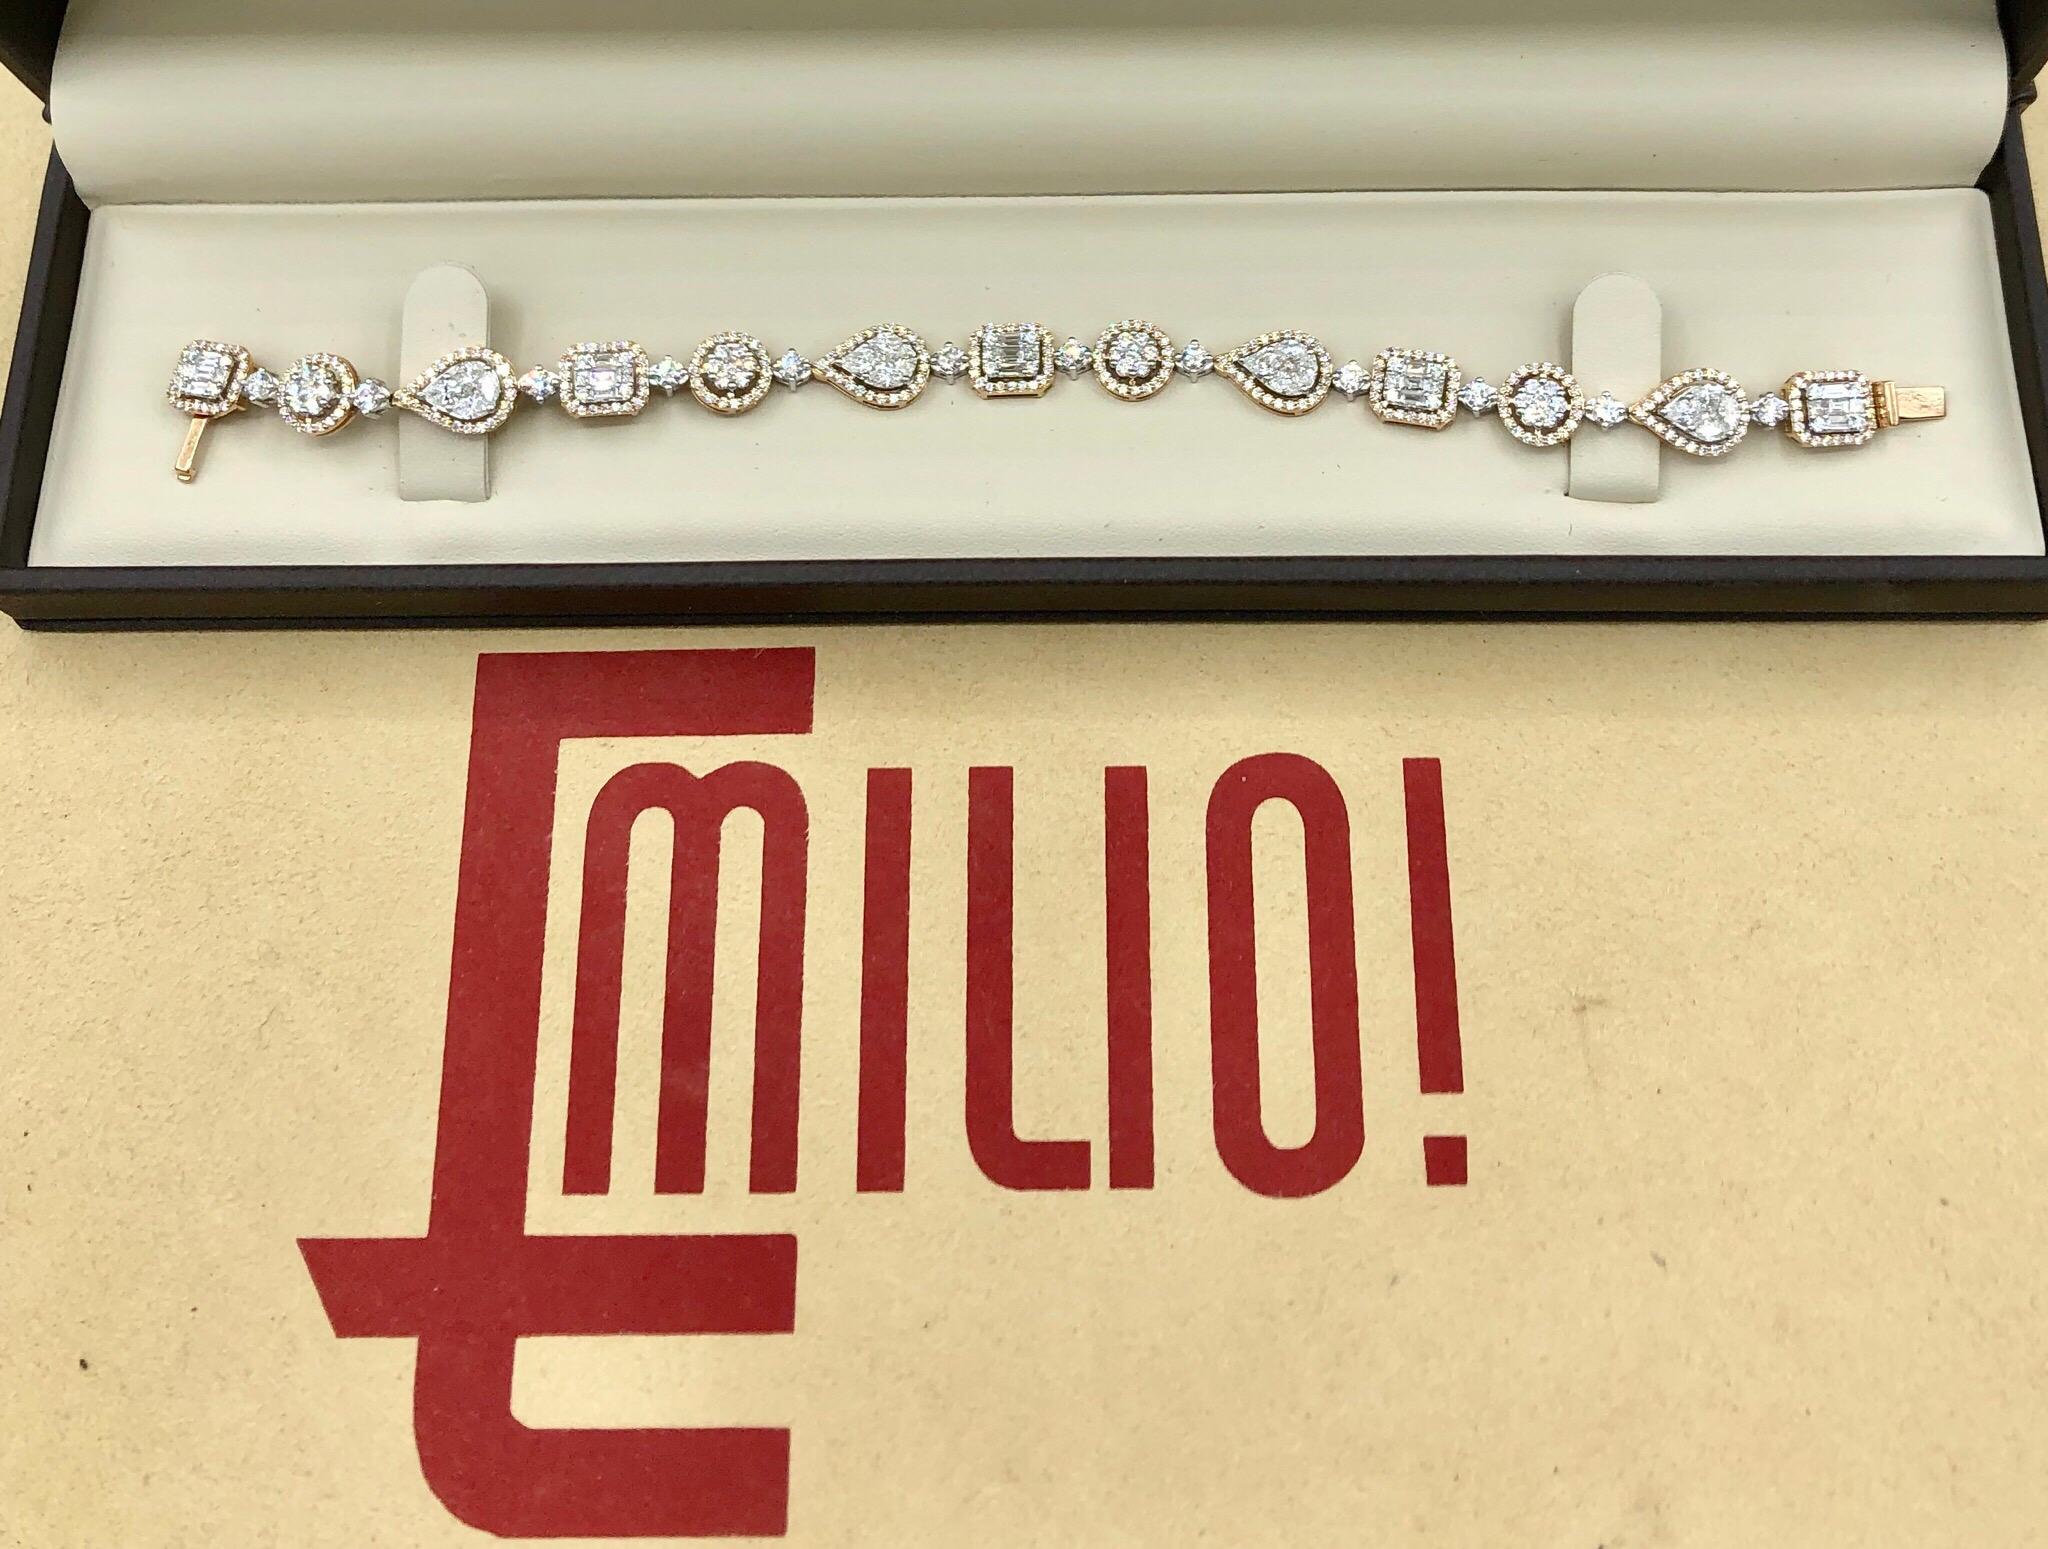 This amazing bracelet is also available to order in 18k white gold. It was well thought out before Emilio designed it! Hand made in the Emilio Jewelry Factory. Here are the details
Metal: 18k
Natural Diamonds: 5.92 carats mixed shapes including